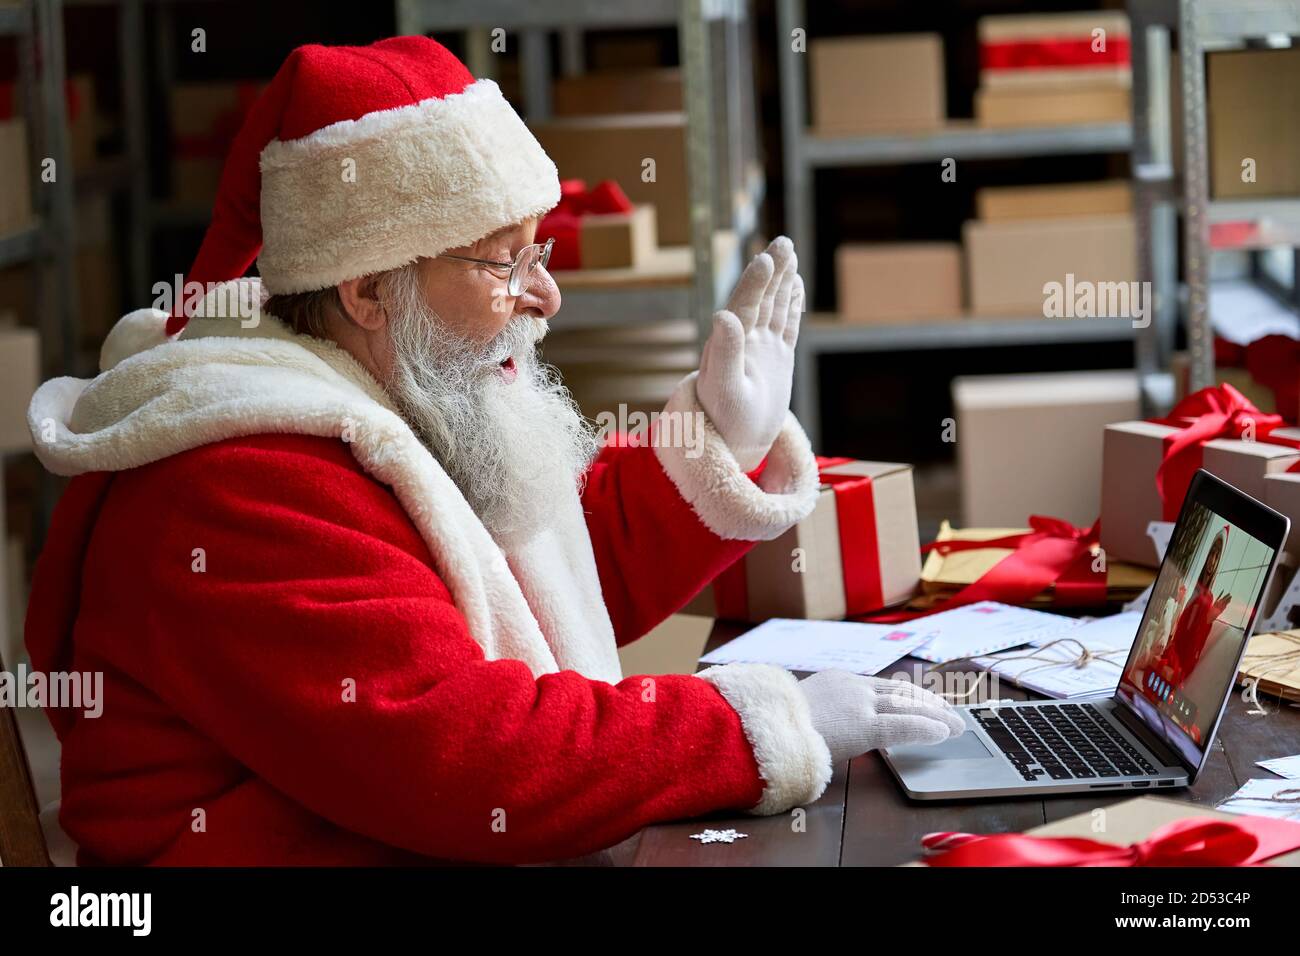 Santa Claus video calling on laptop greeting child sit at workshop table. Stock Photo